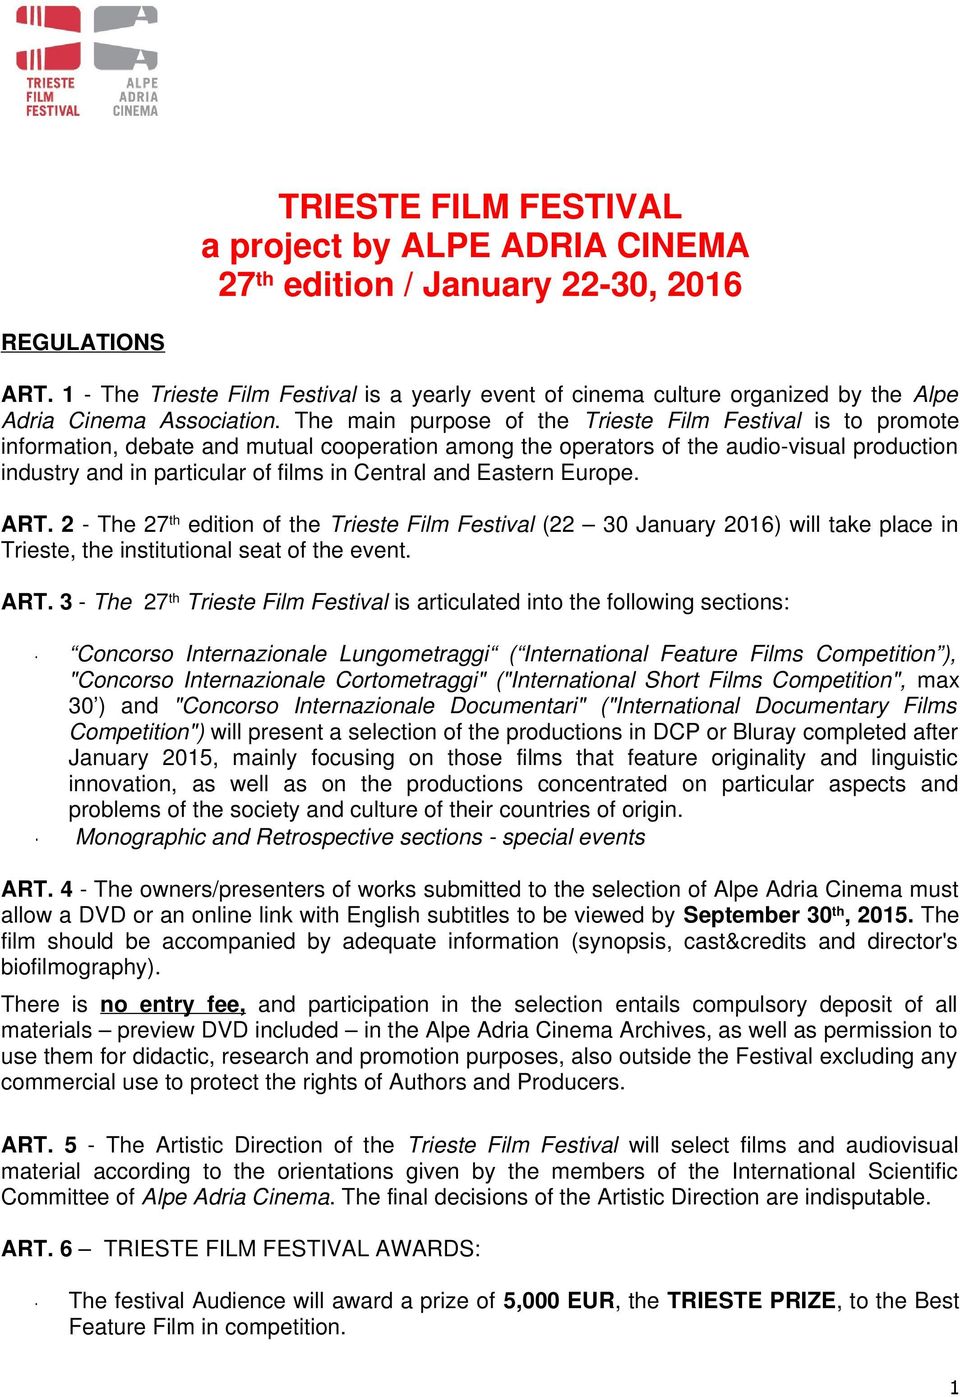 The main purpose of the Trieste Film Festival is to promote information, debate and mutual cooperation among the operators of the audio-visual production industry and in particular of films in